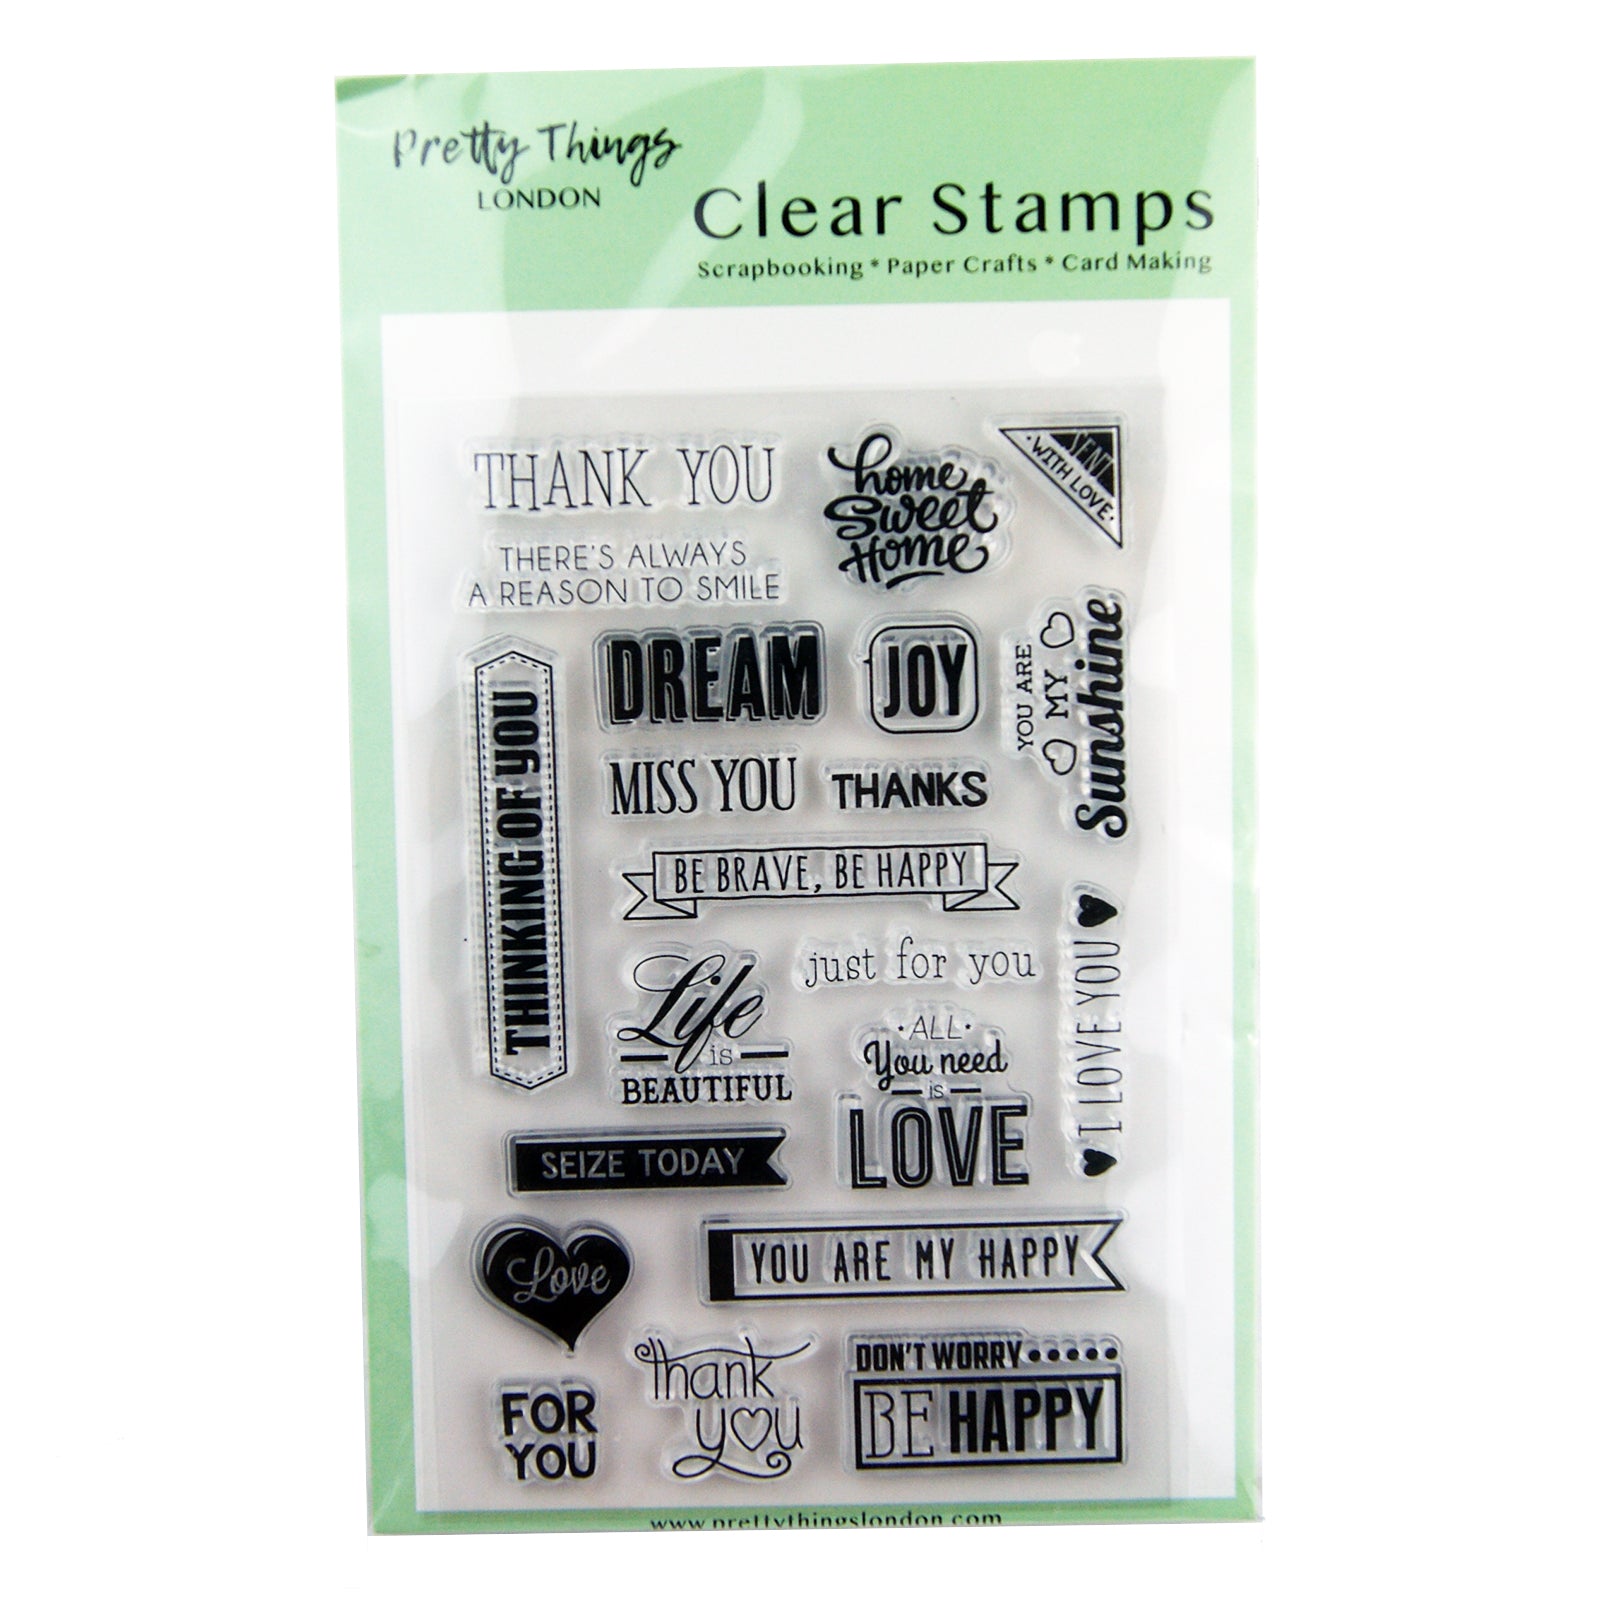 Clear stamp set various sentiments card making and scrapbooking